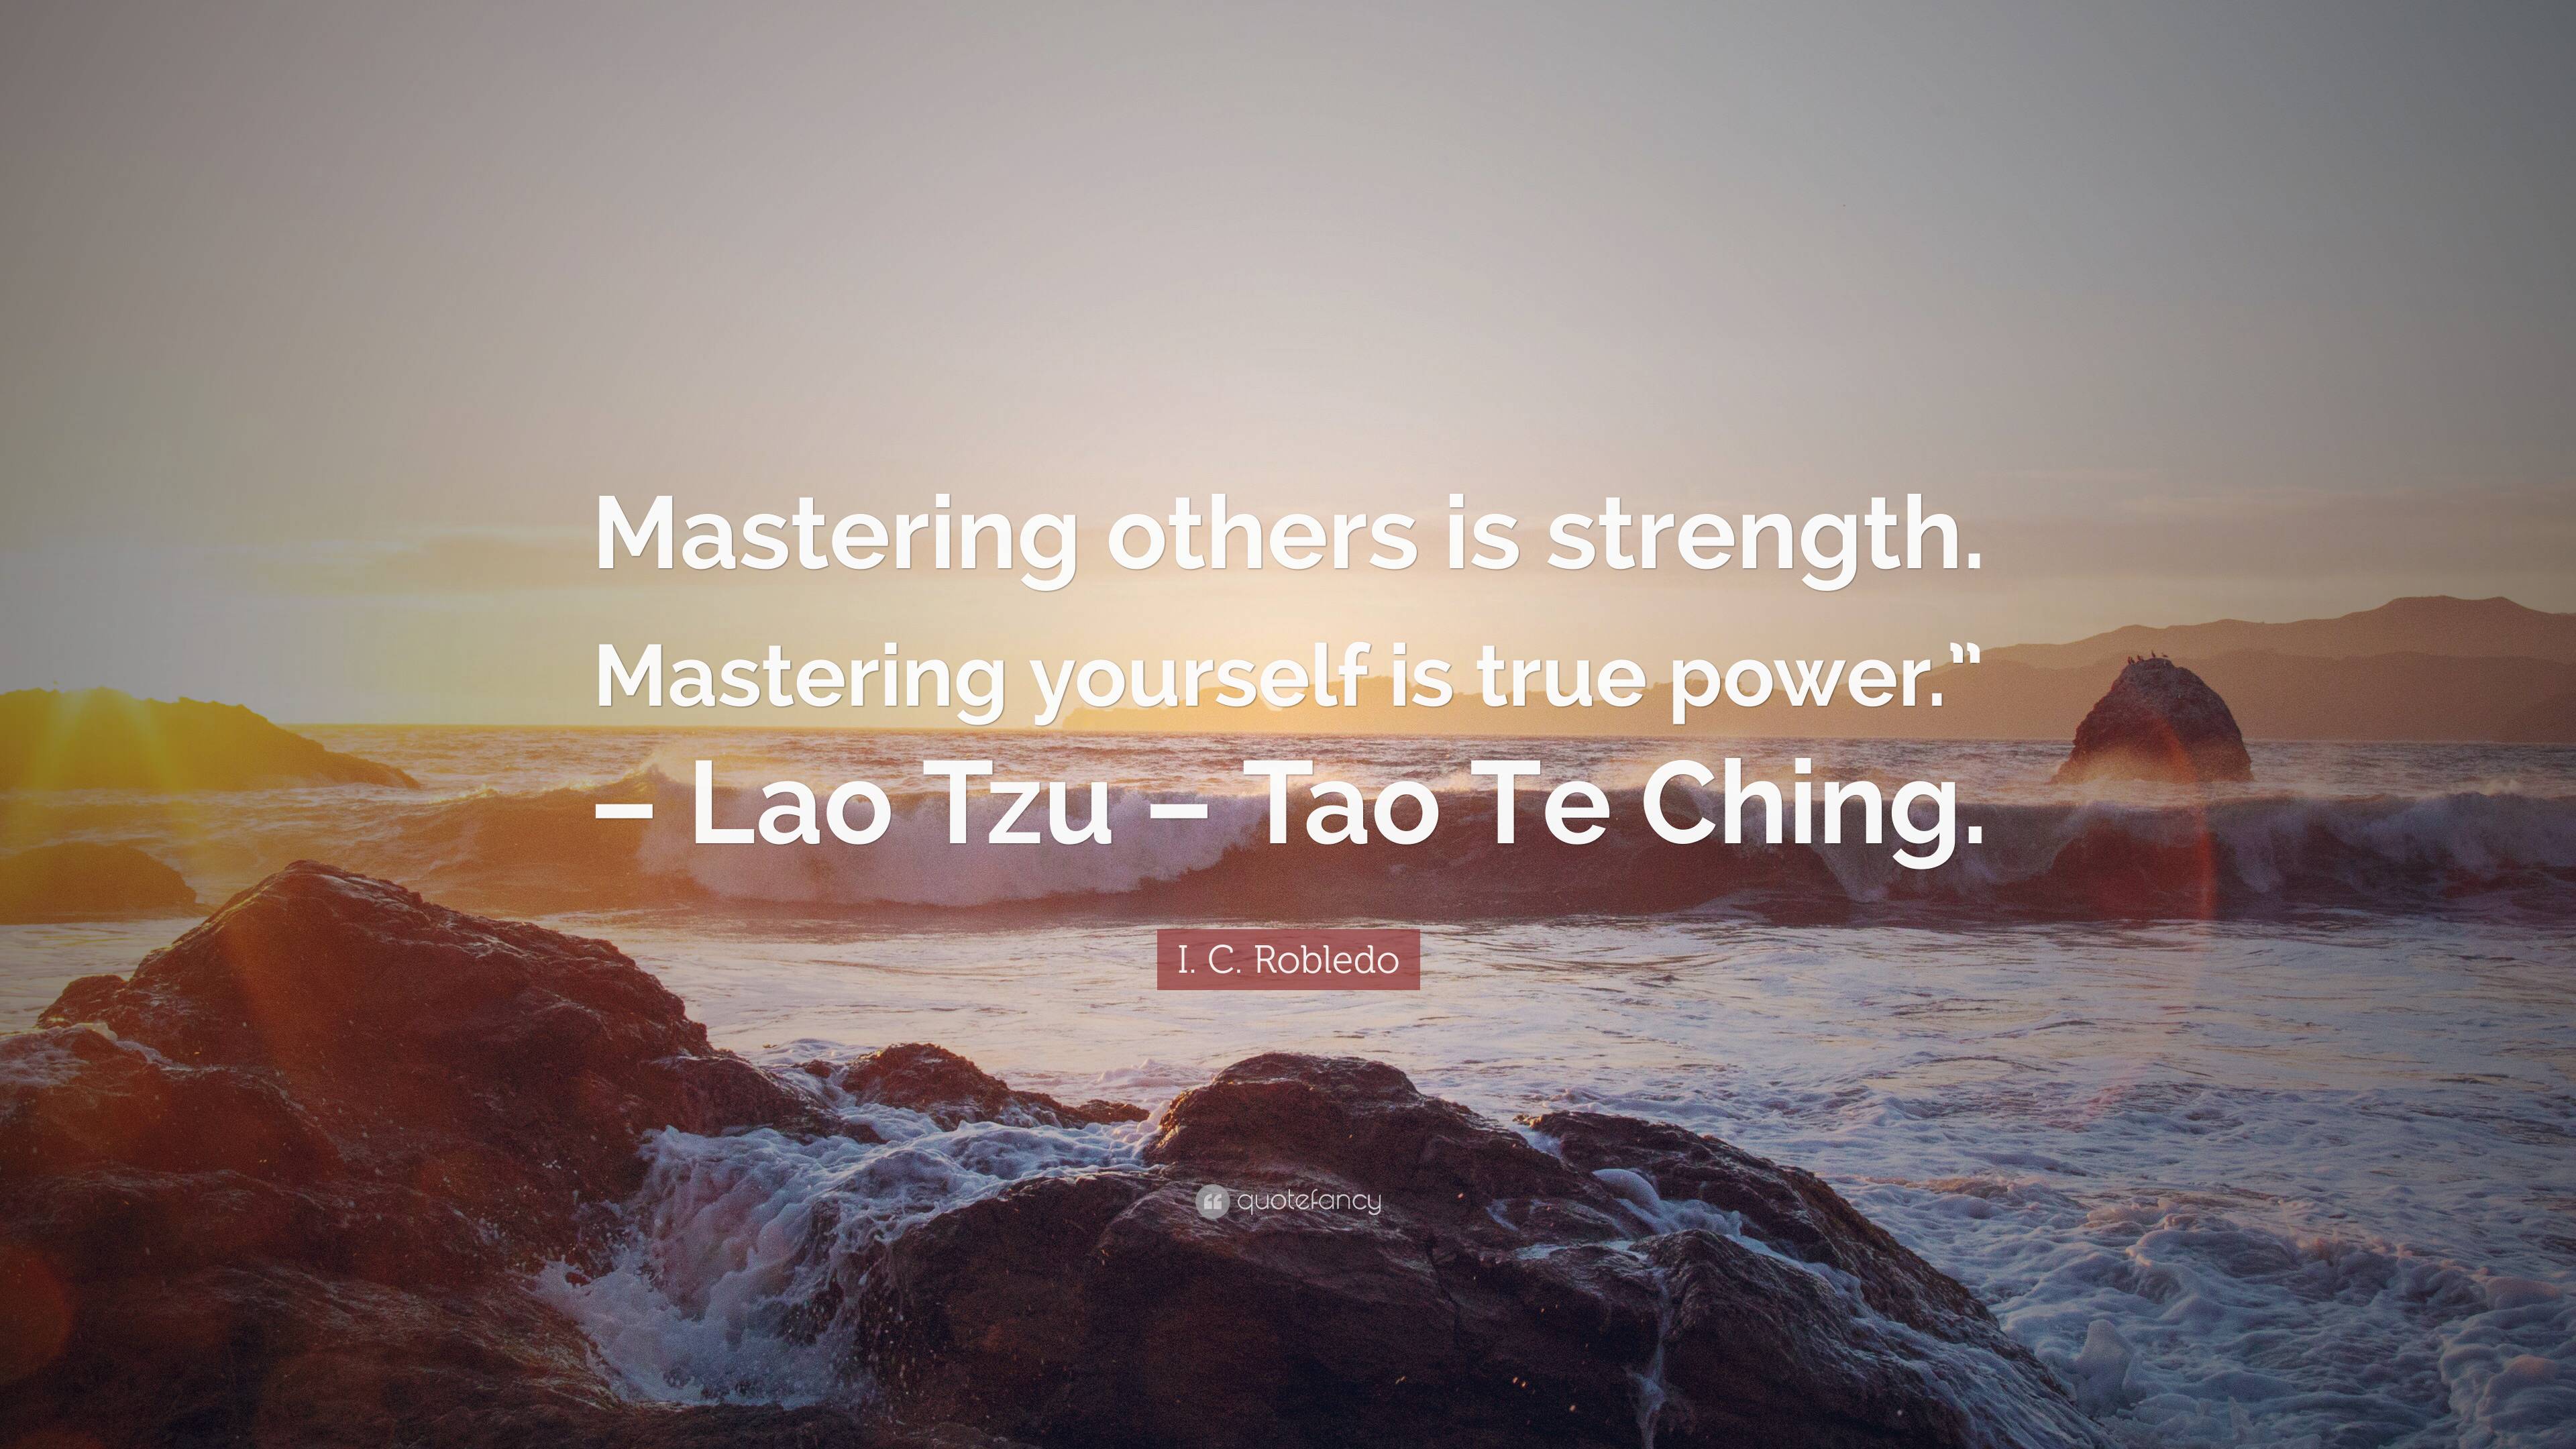 Buy Lao Tzu and Tao Te Ching Quote Motivational Quotes Lao Tzu